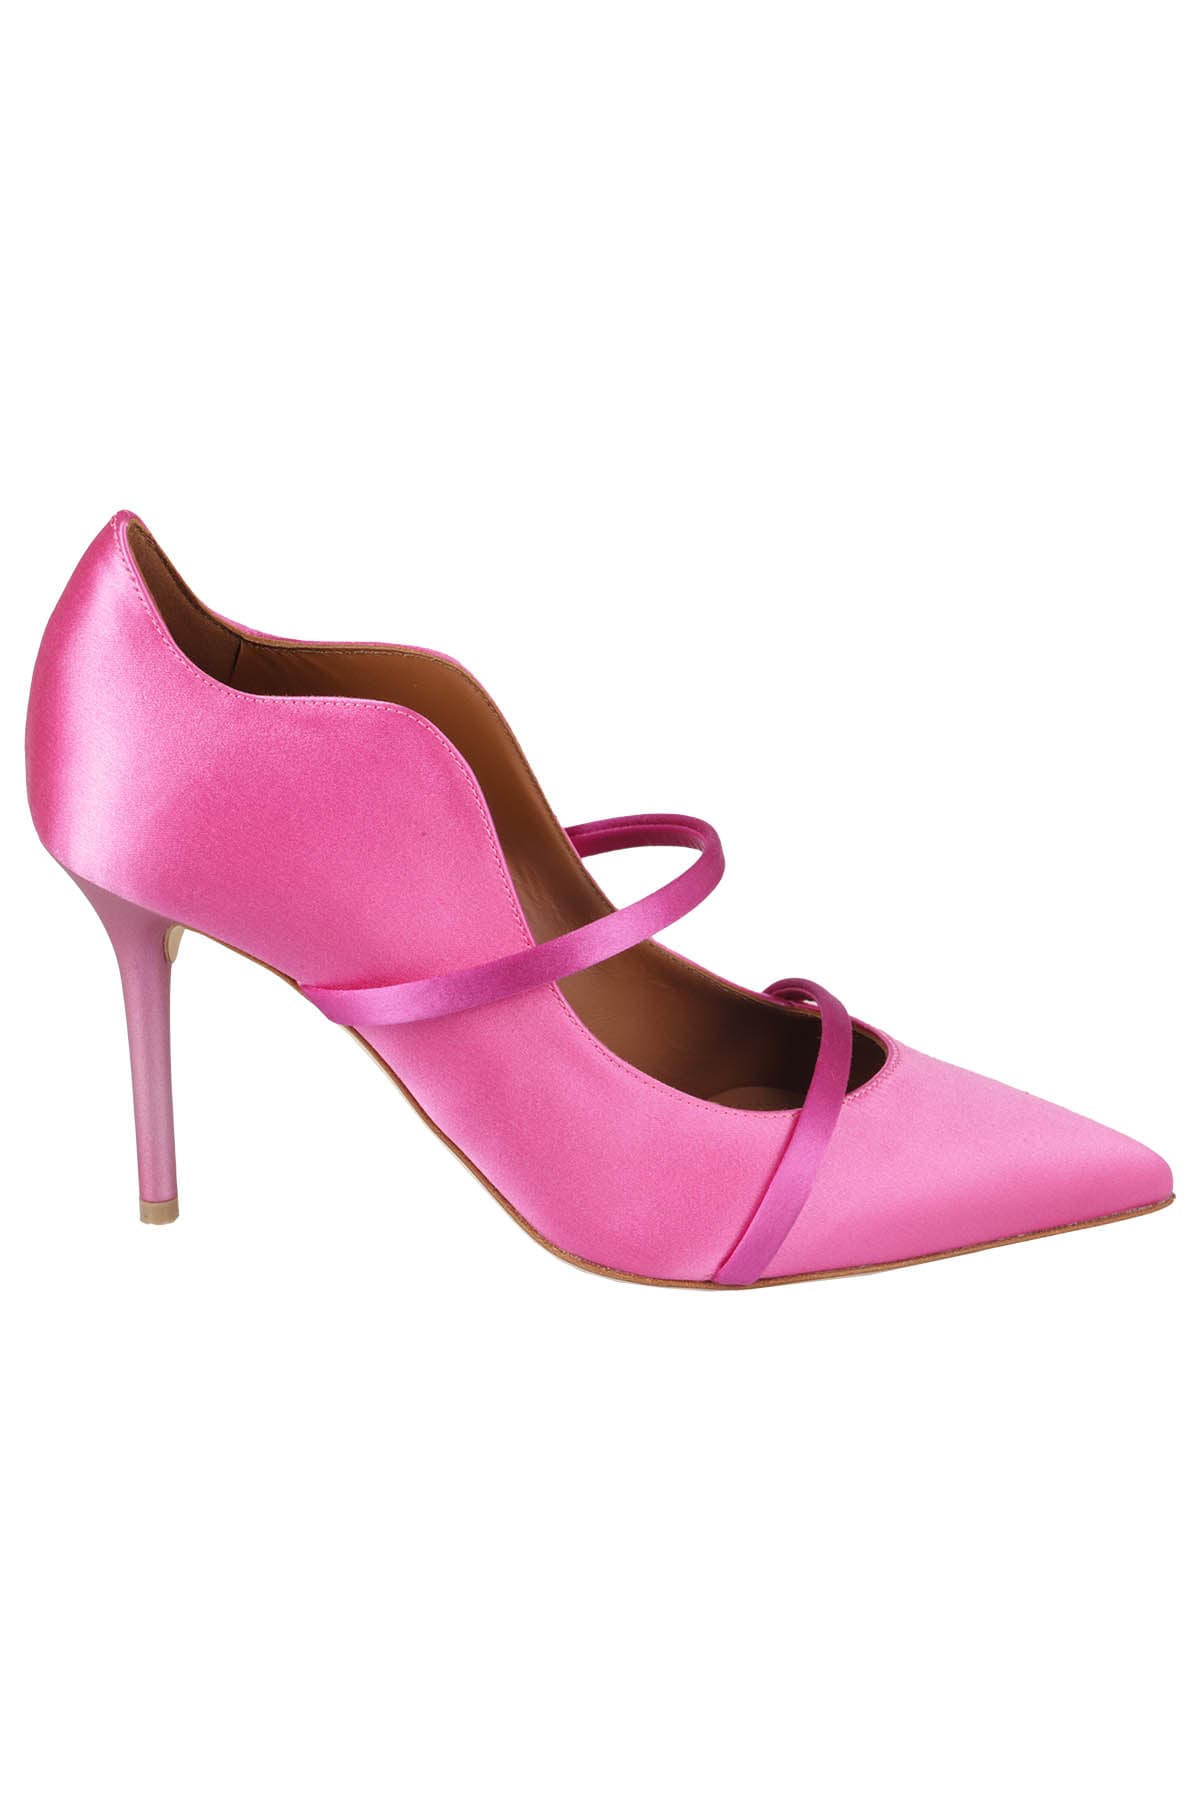 Malone Souliers Satin In Pink Berry